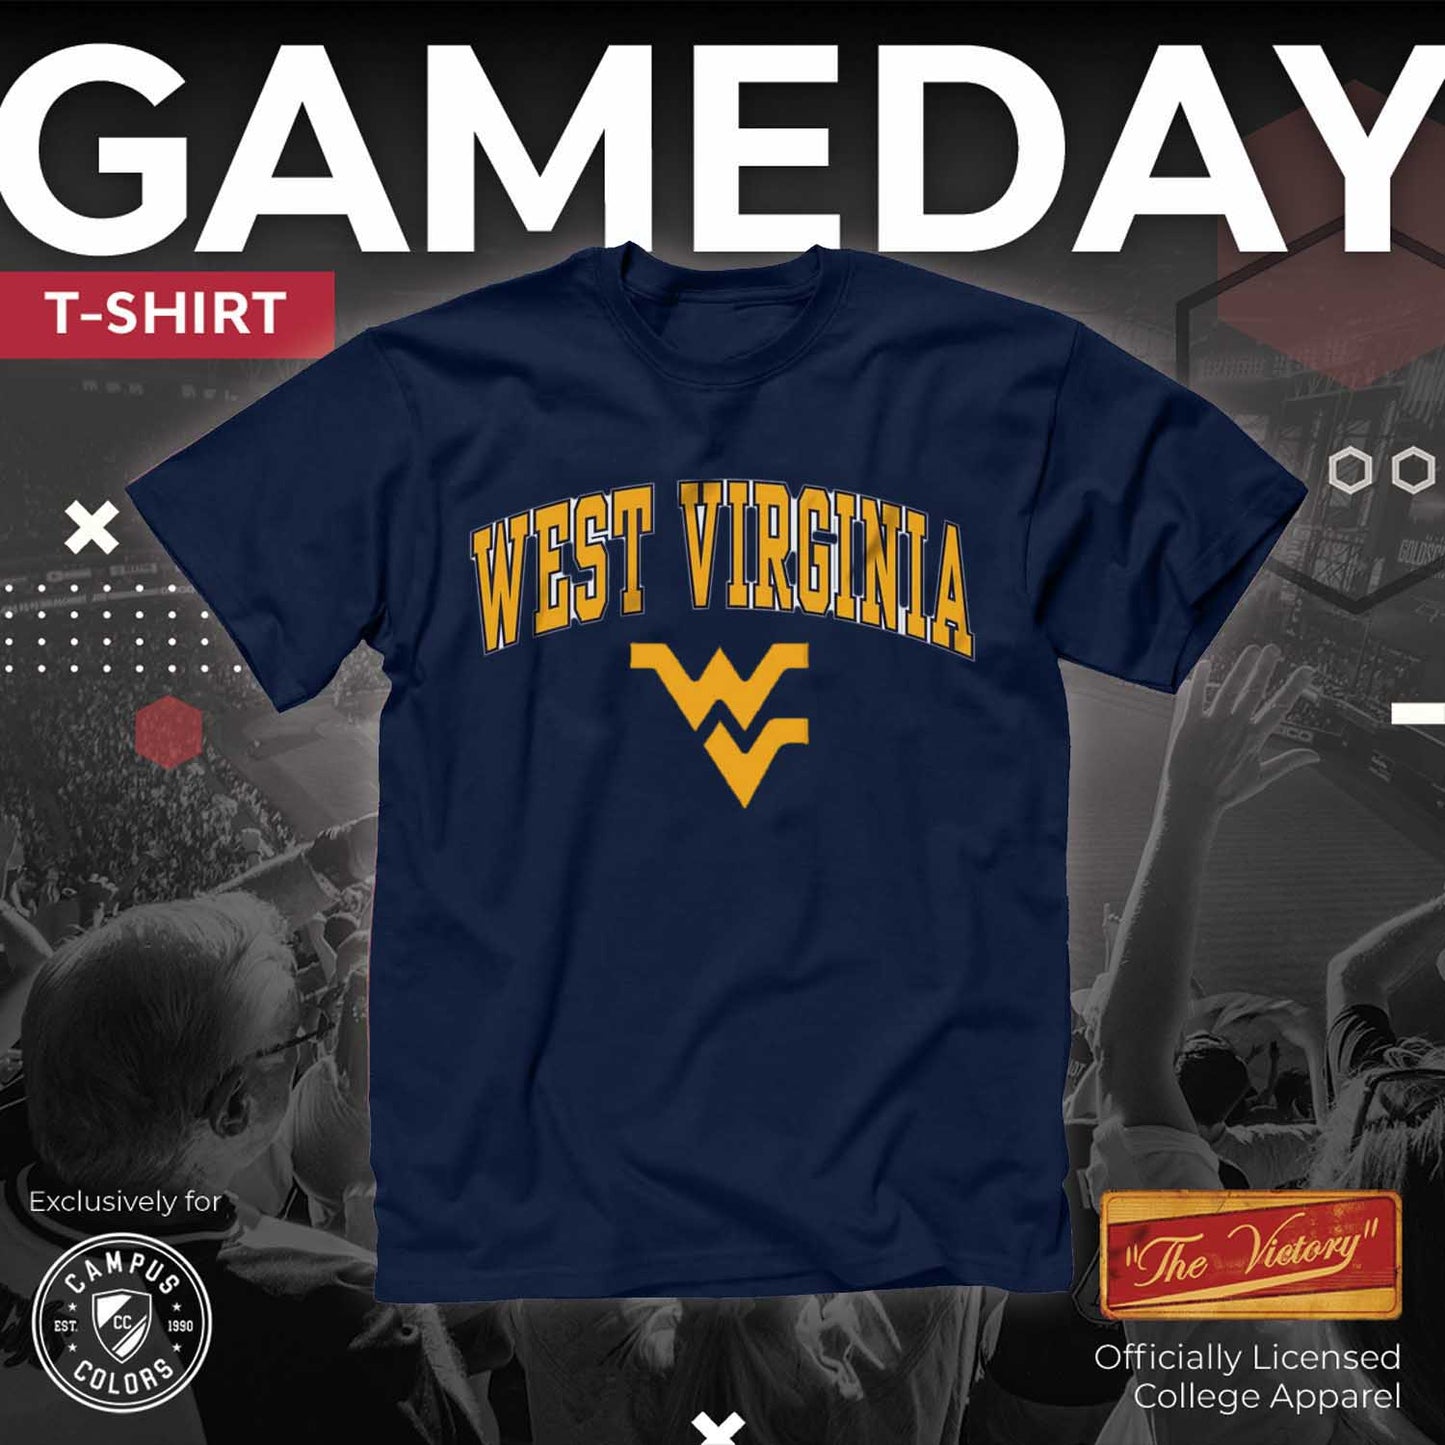 West Virginia Mountaineers  Arch and Logo Short Sleeve T-shirt Navy - Navy